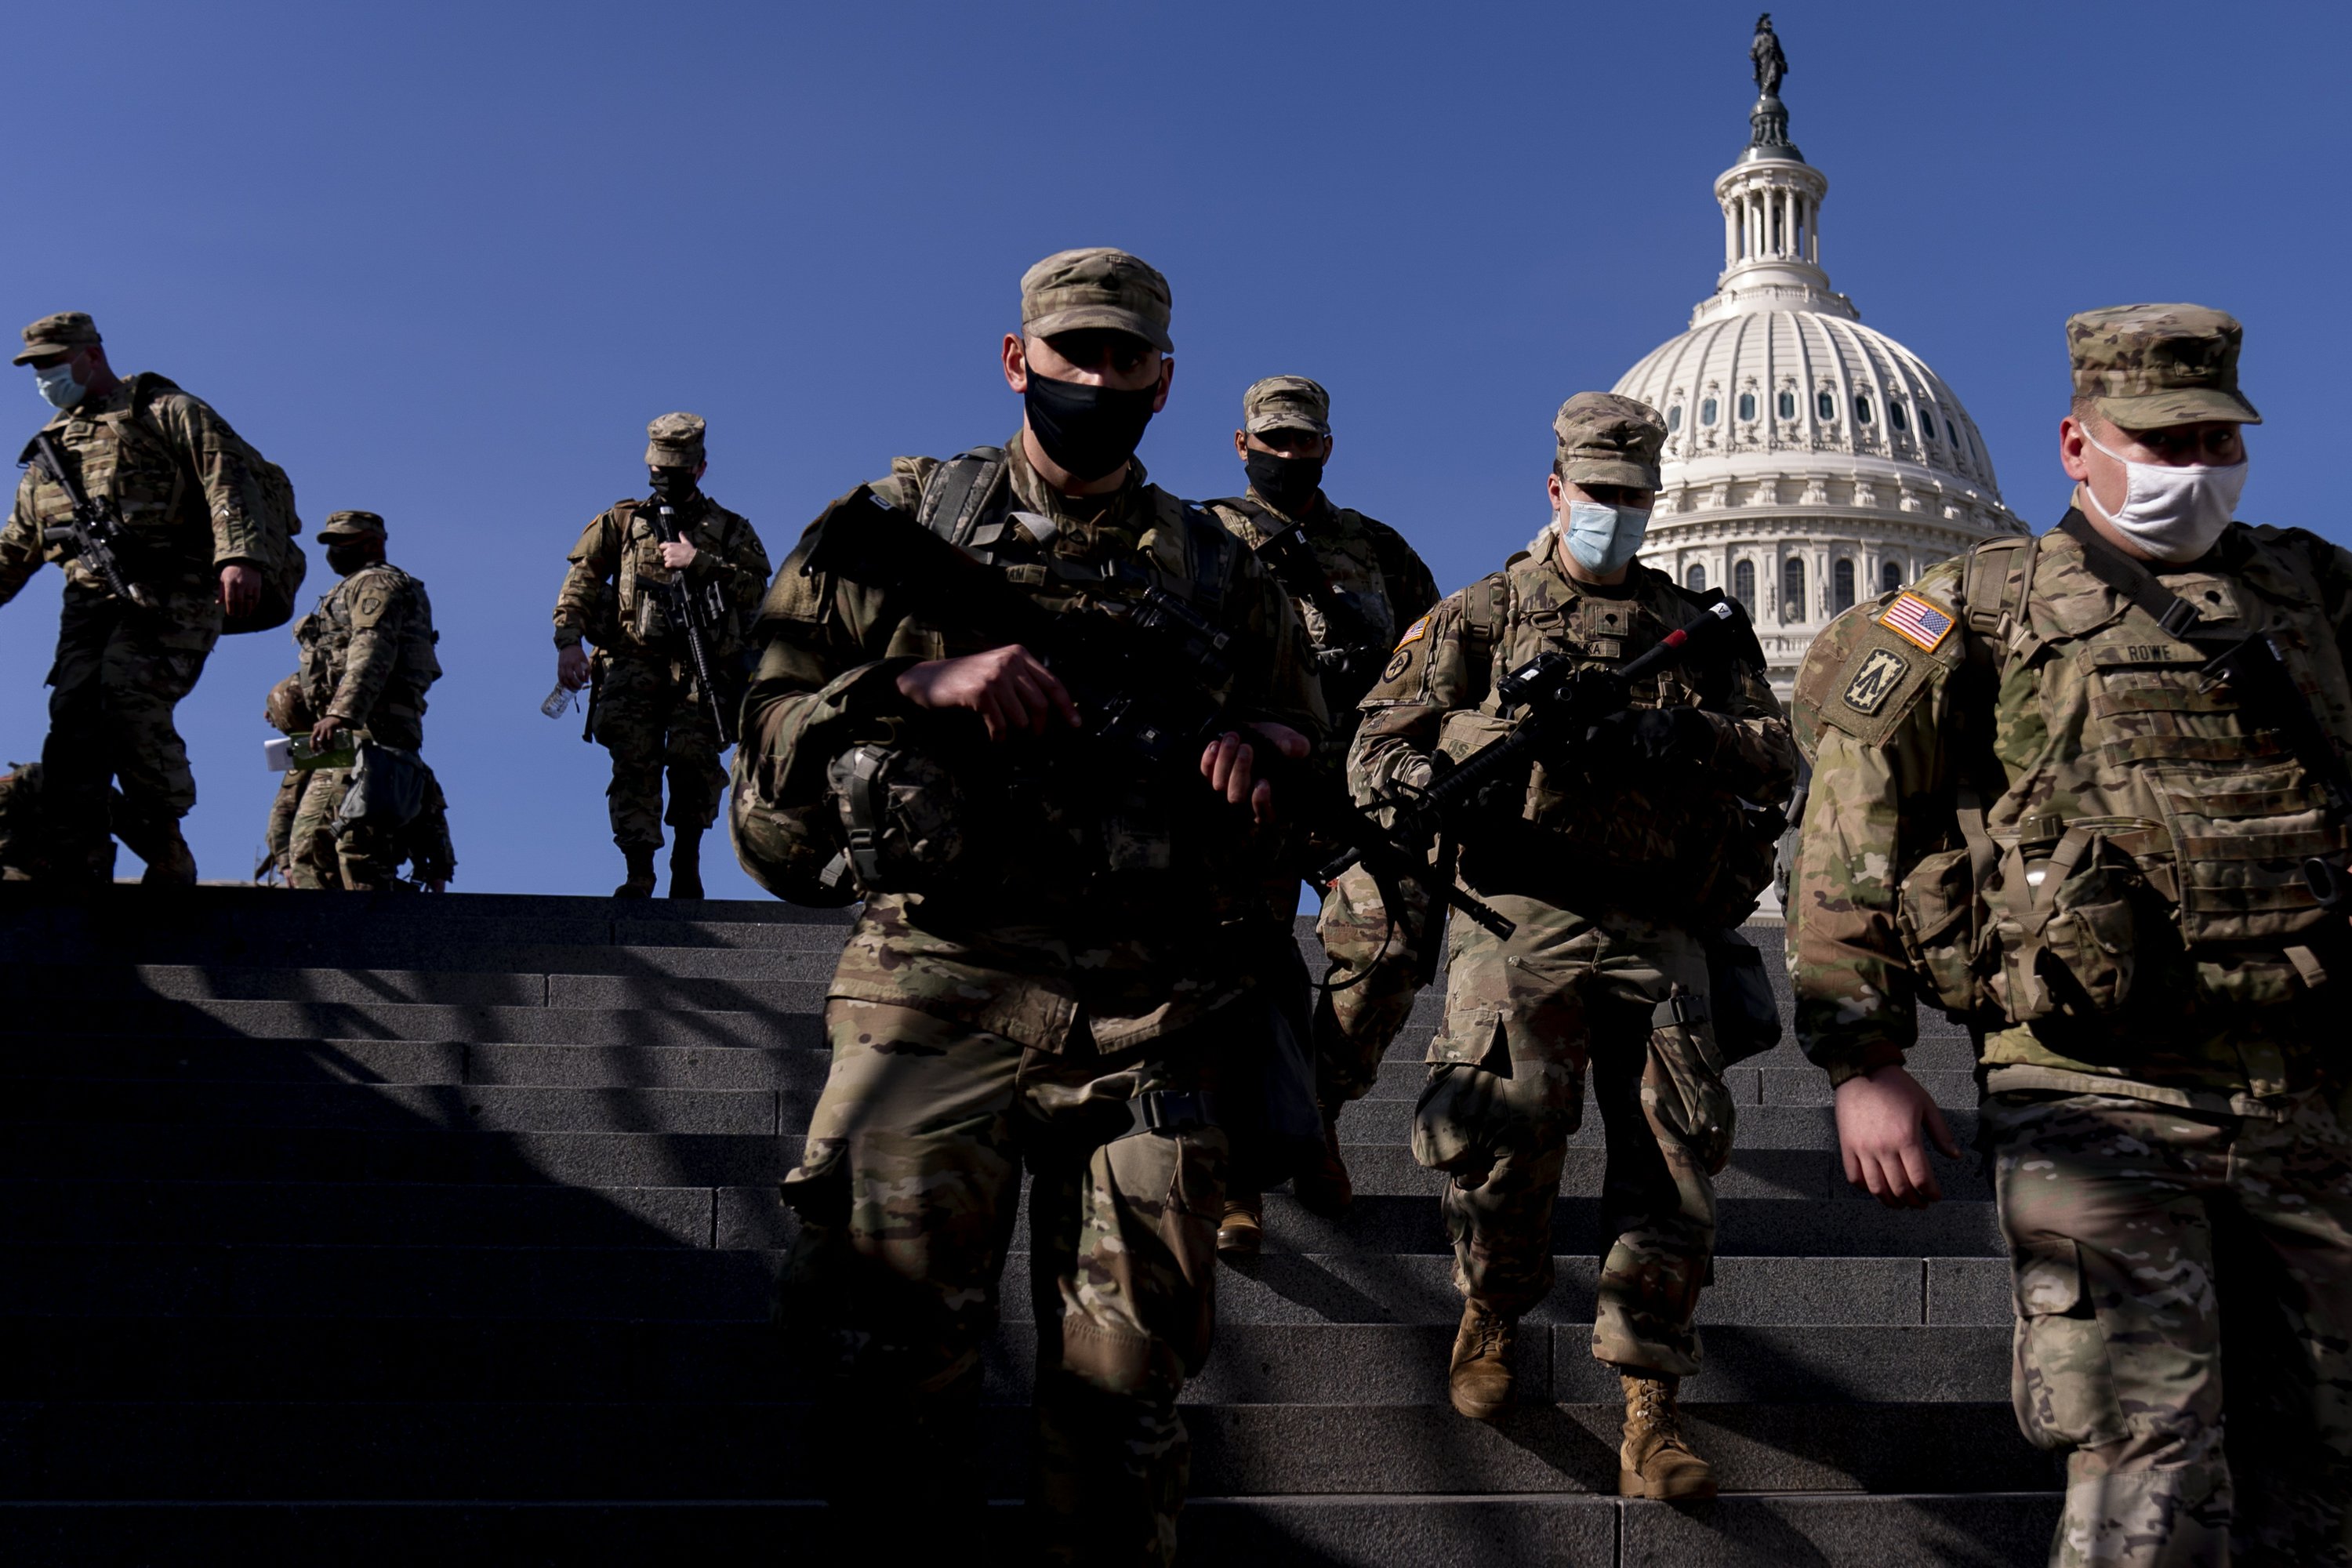 Troops of the National Guard pour in as Washington locks up